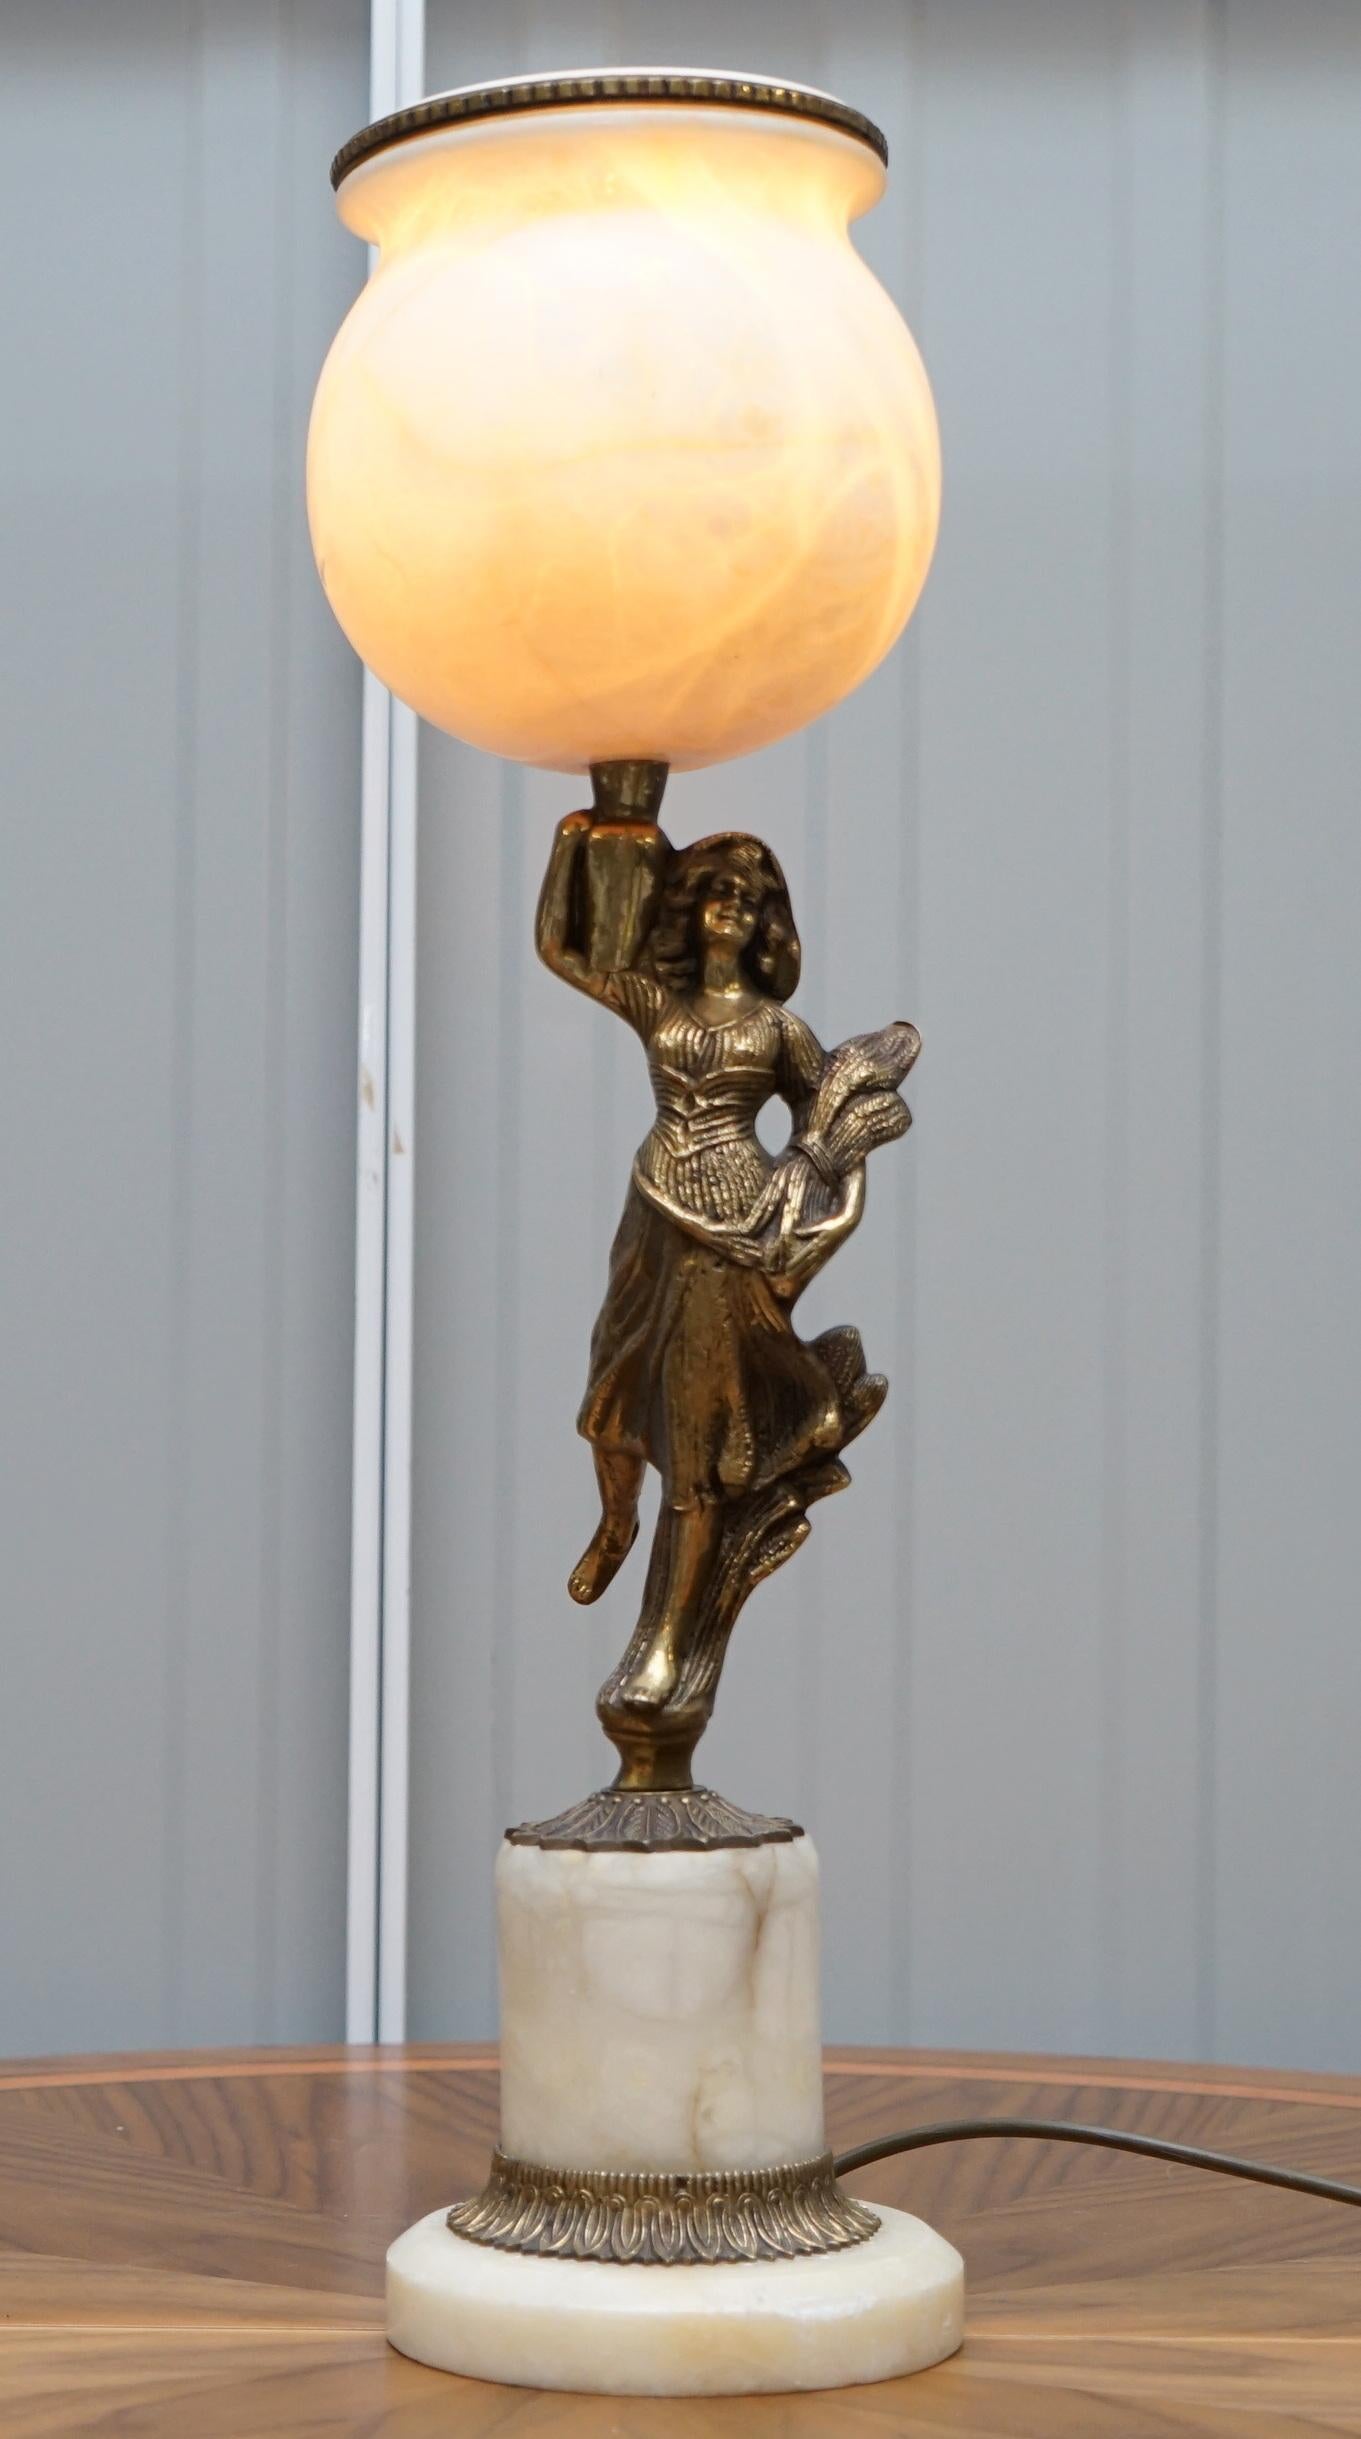 We are delighted to offer for sale this very rare original French Art Deco table lamp with a stunning opalescent Lustre

This is one of the most sublime lamps I have ever laid my hands on. It has a beautifully grained marble which when the light